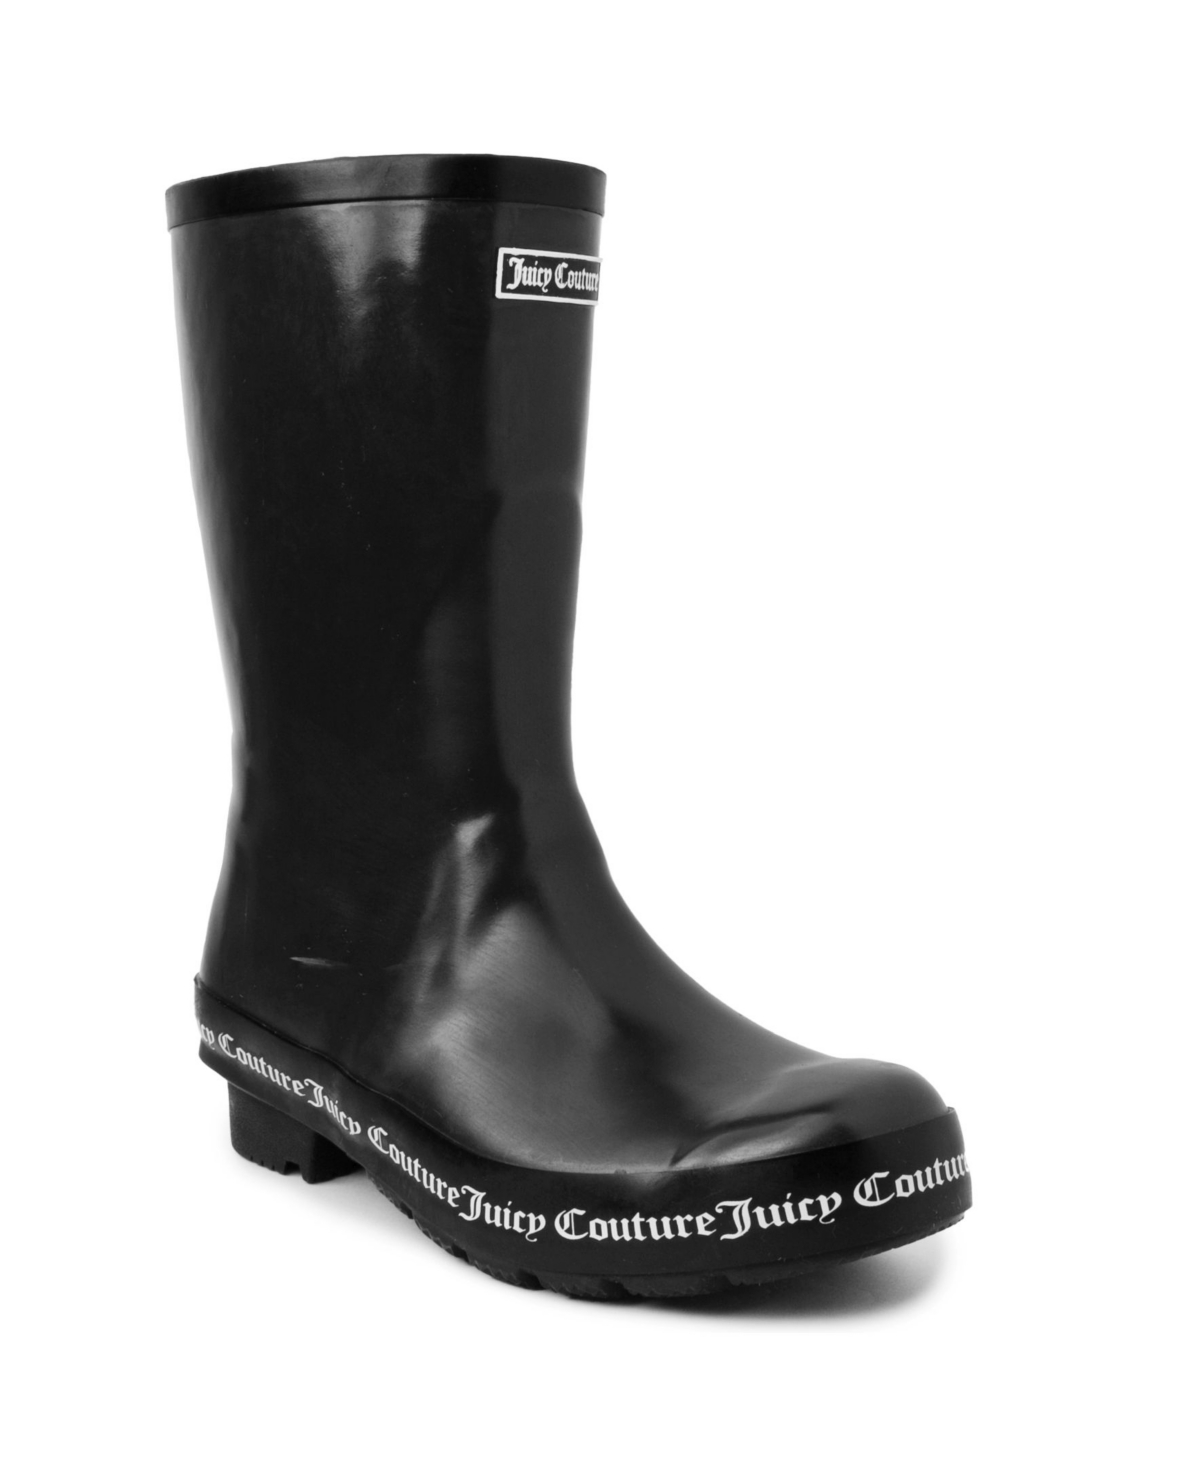 Juicy Couture Women's Totally Logo Rainboots Women's Shoes